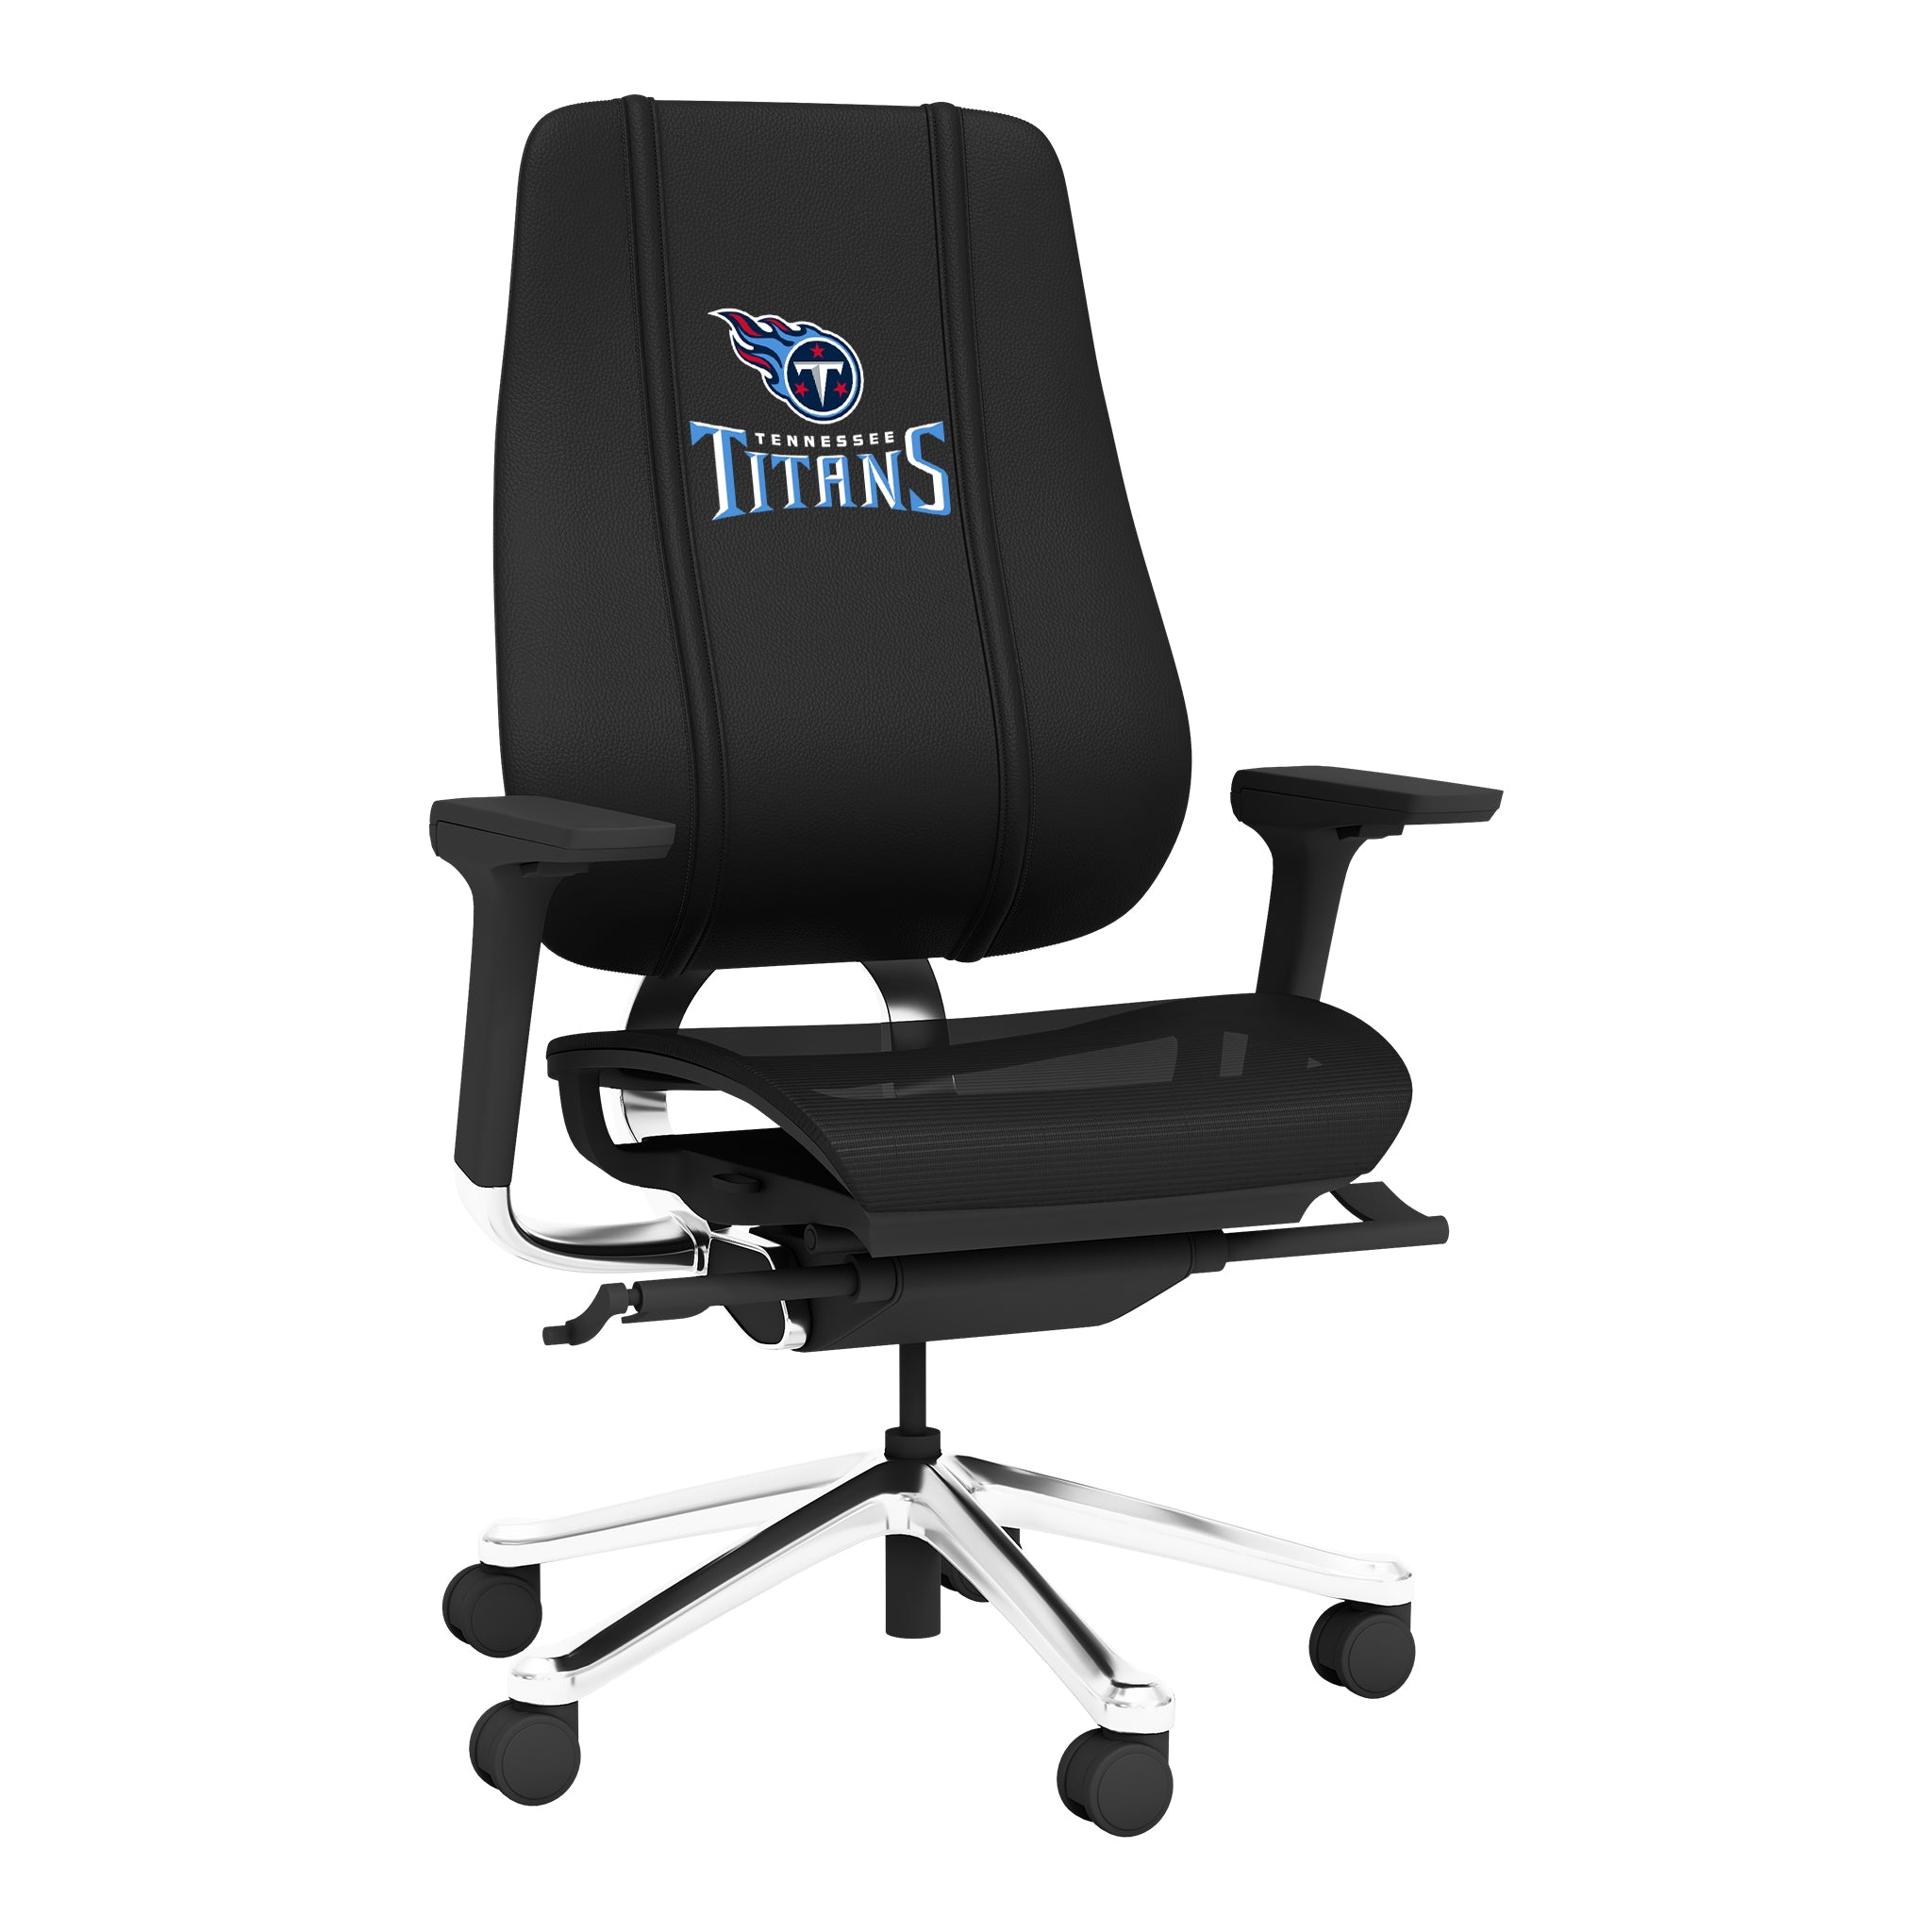 Tennessee Titans PhantomX Chair - Office - Home